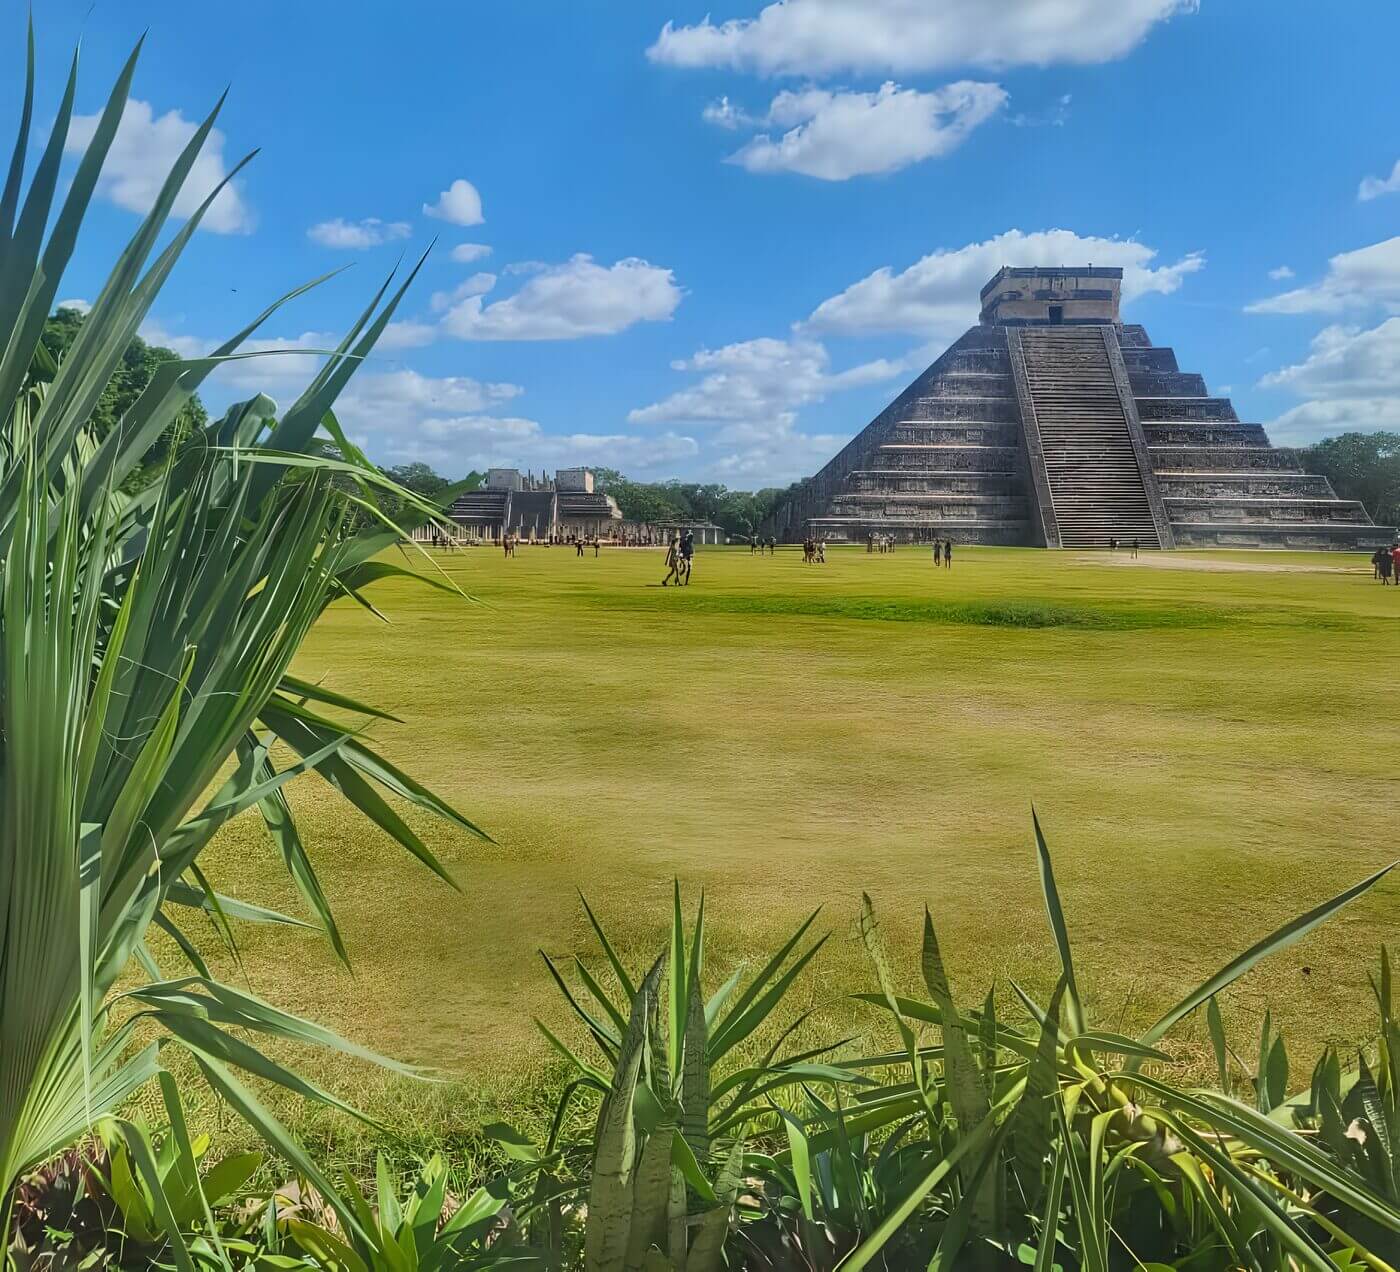 taking a tour to Chichen Itza from Playa Del Carmen